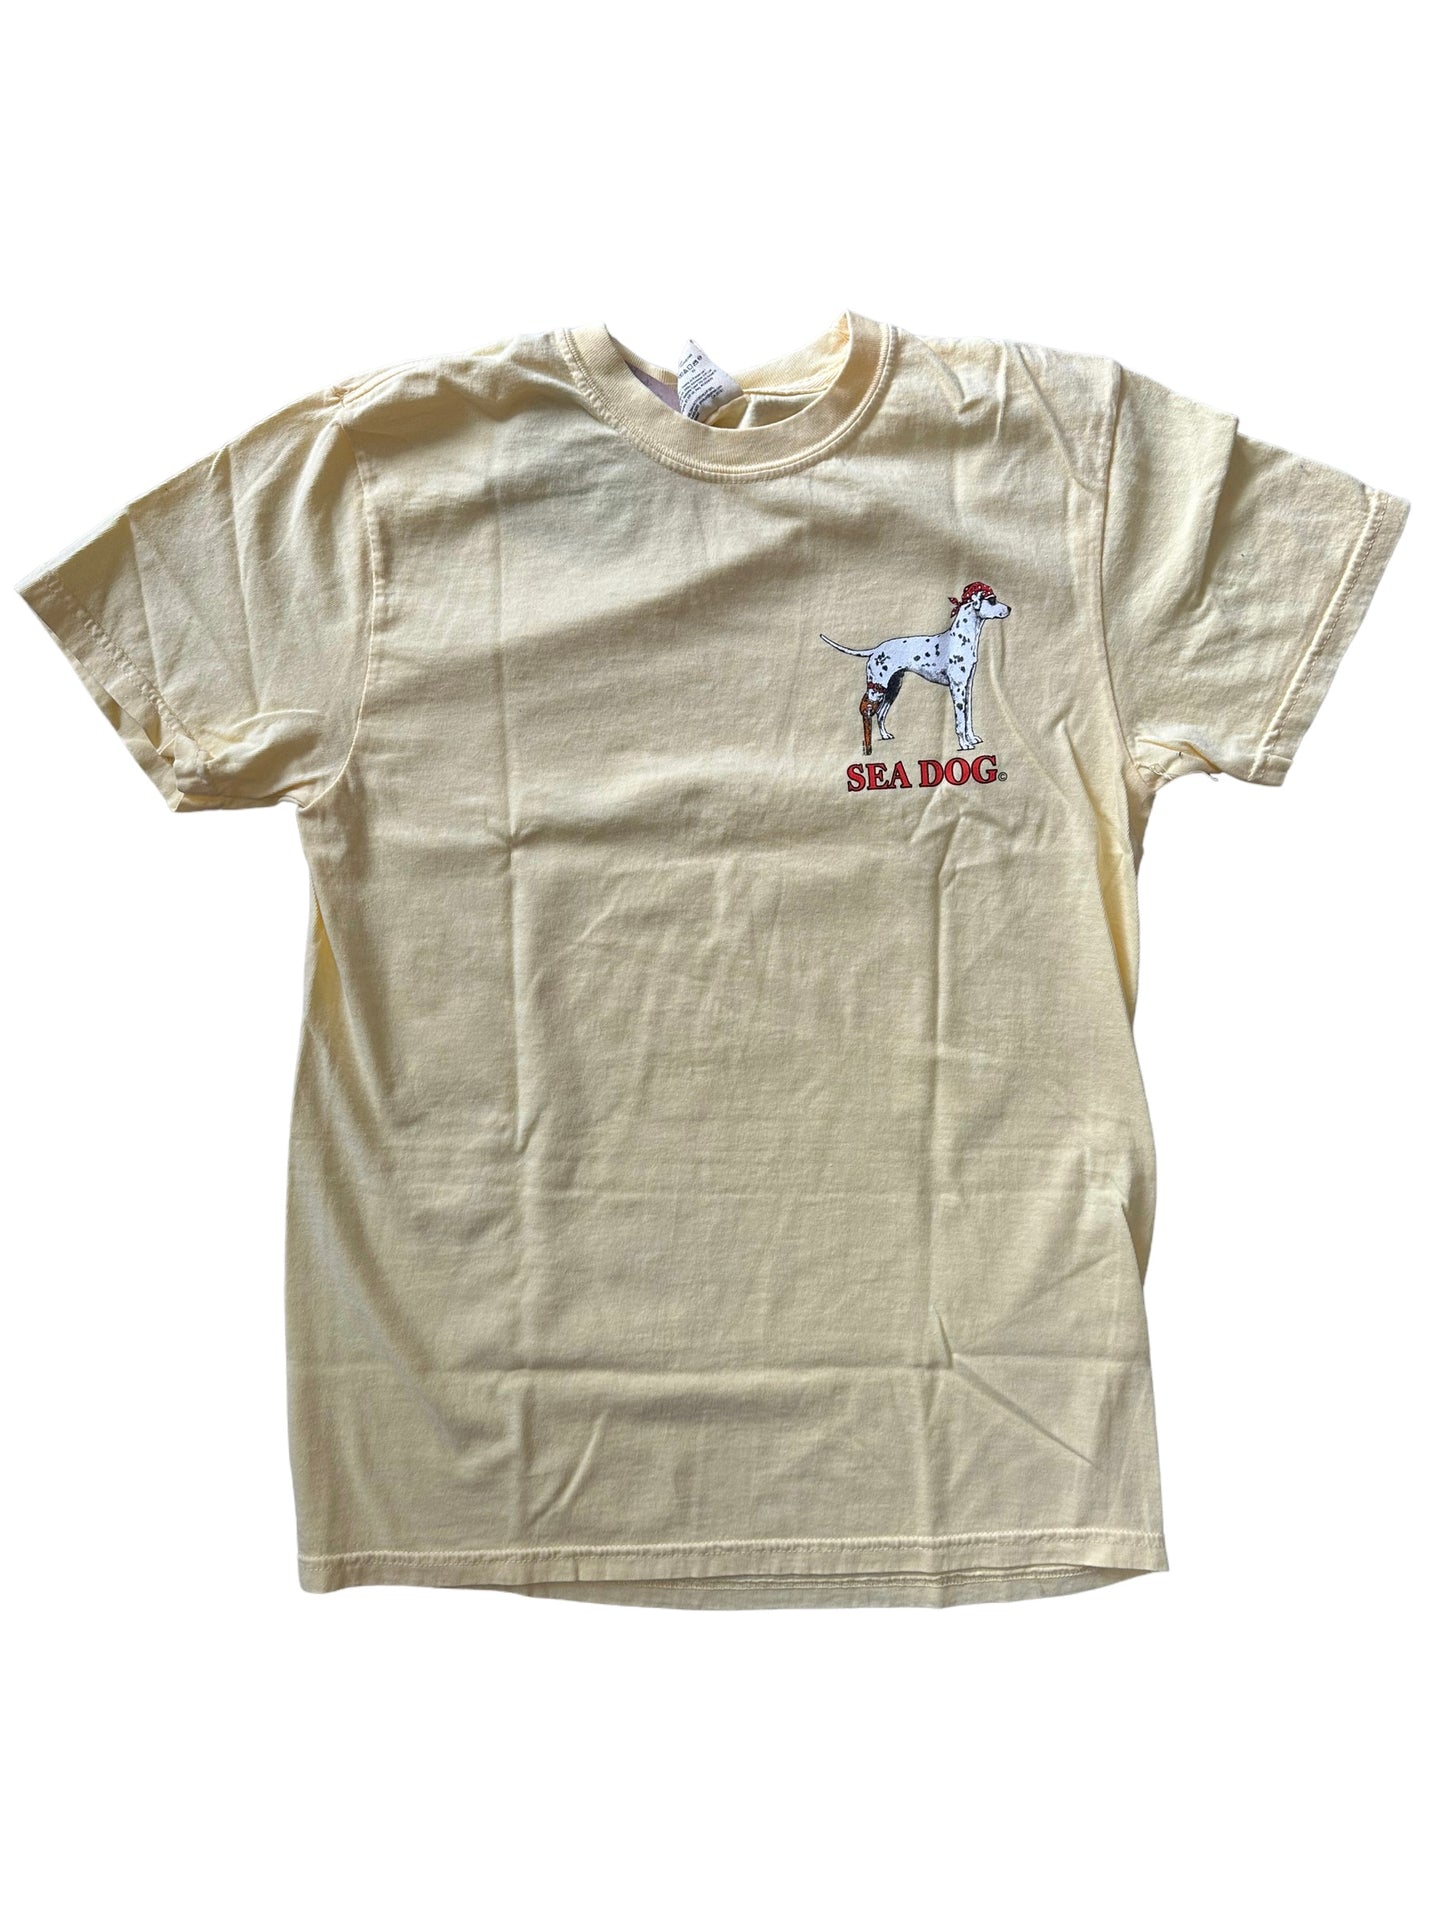 We Are All looking For Tail - Sea Dog T Shirt - Butter